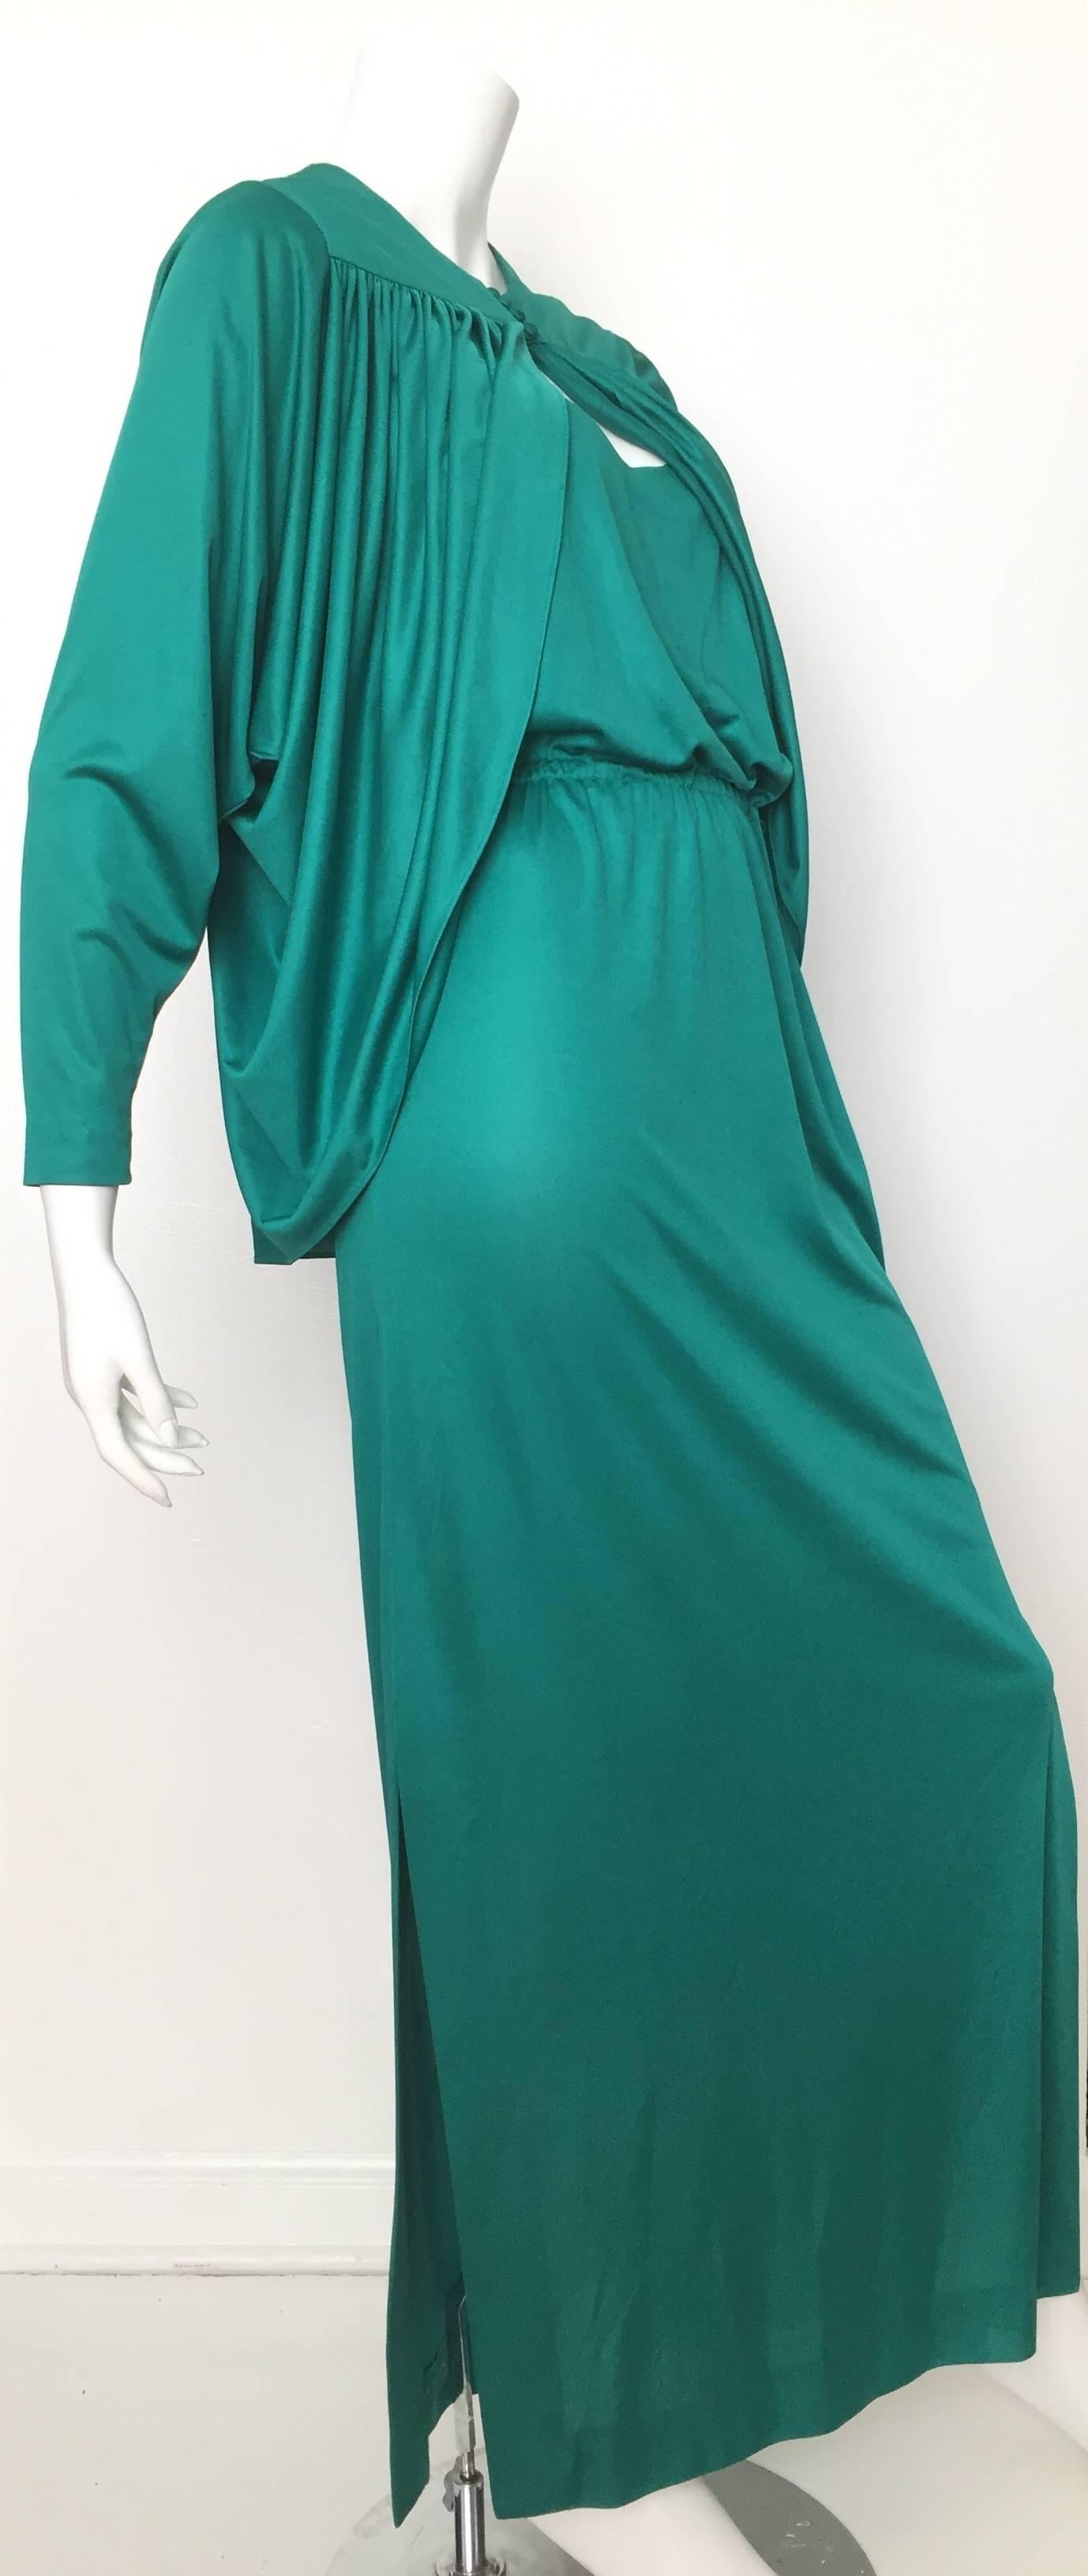 Women's I.Magnin 1970s Maxi Green Dress with Dolman Sleeve with Jacket Size 4. 